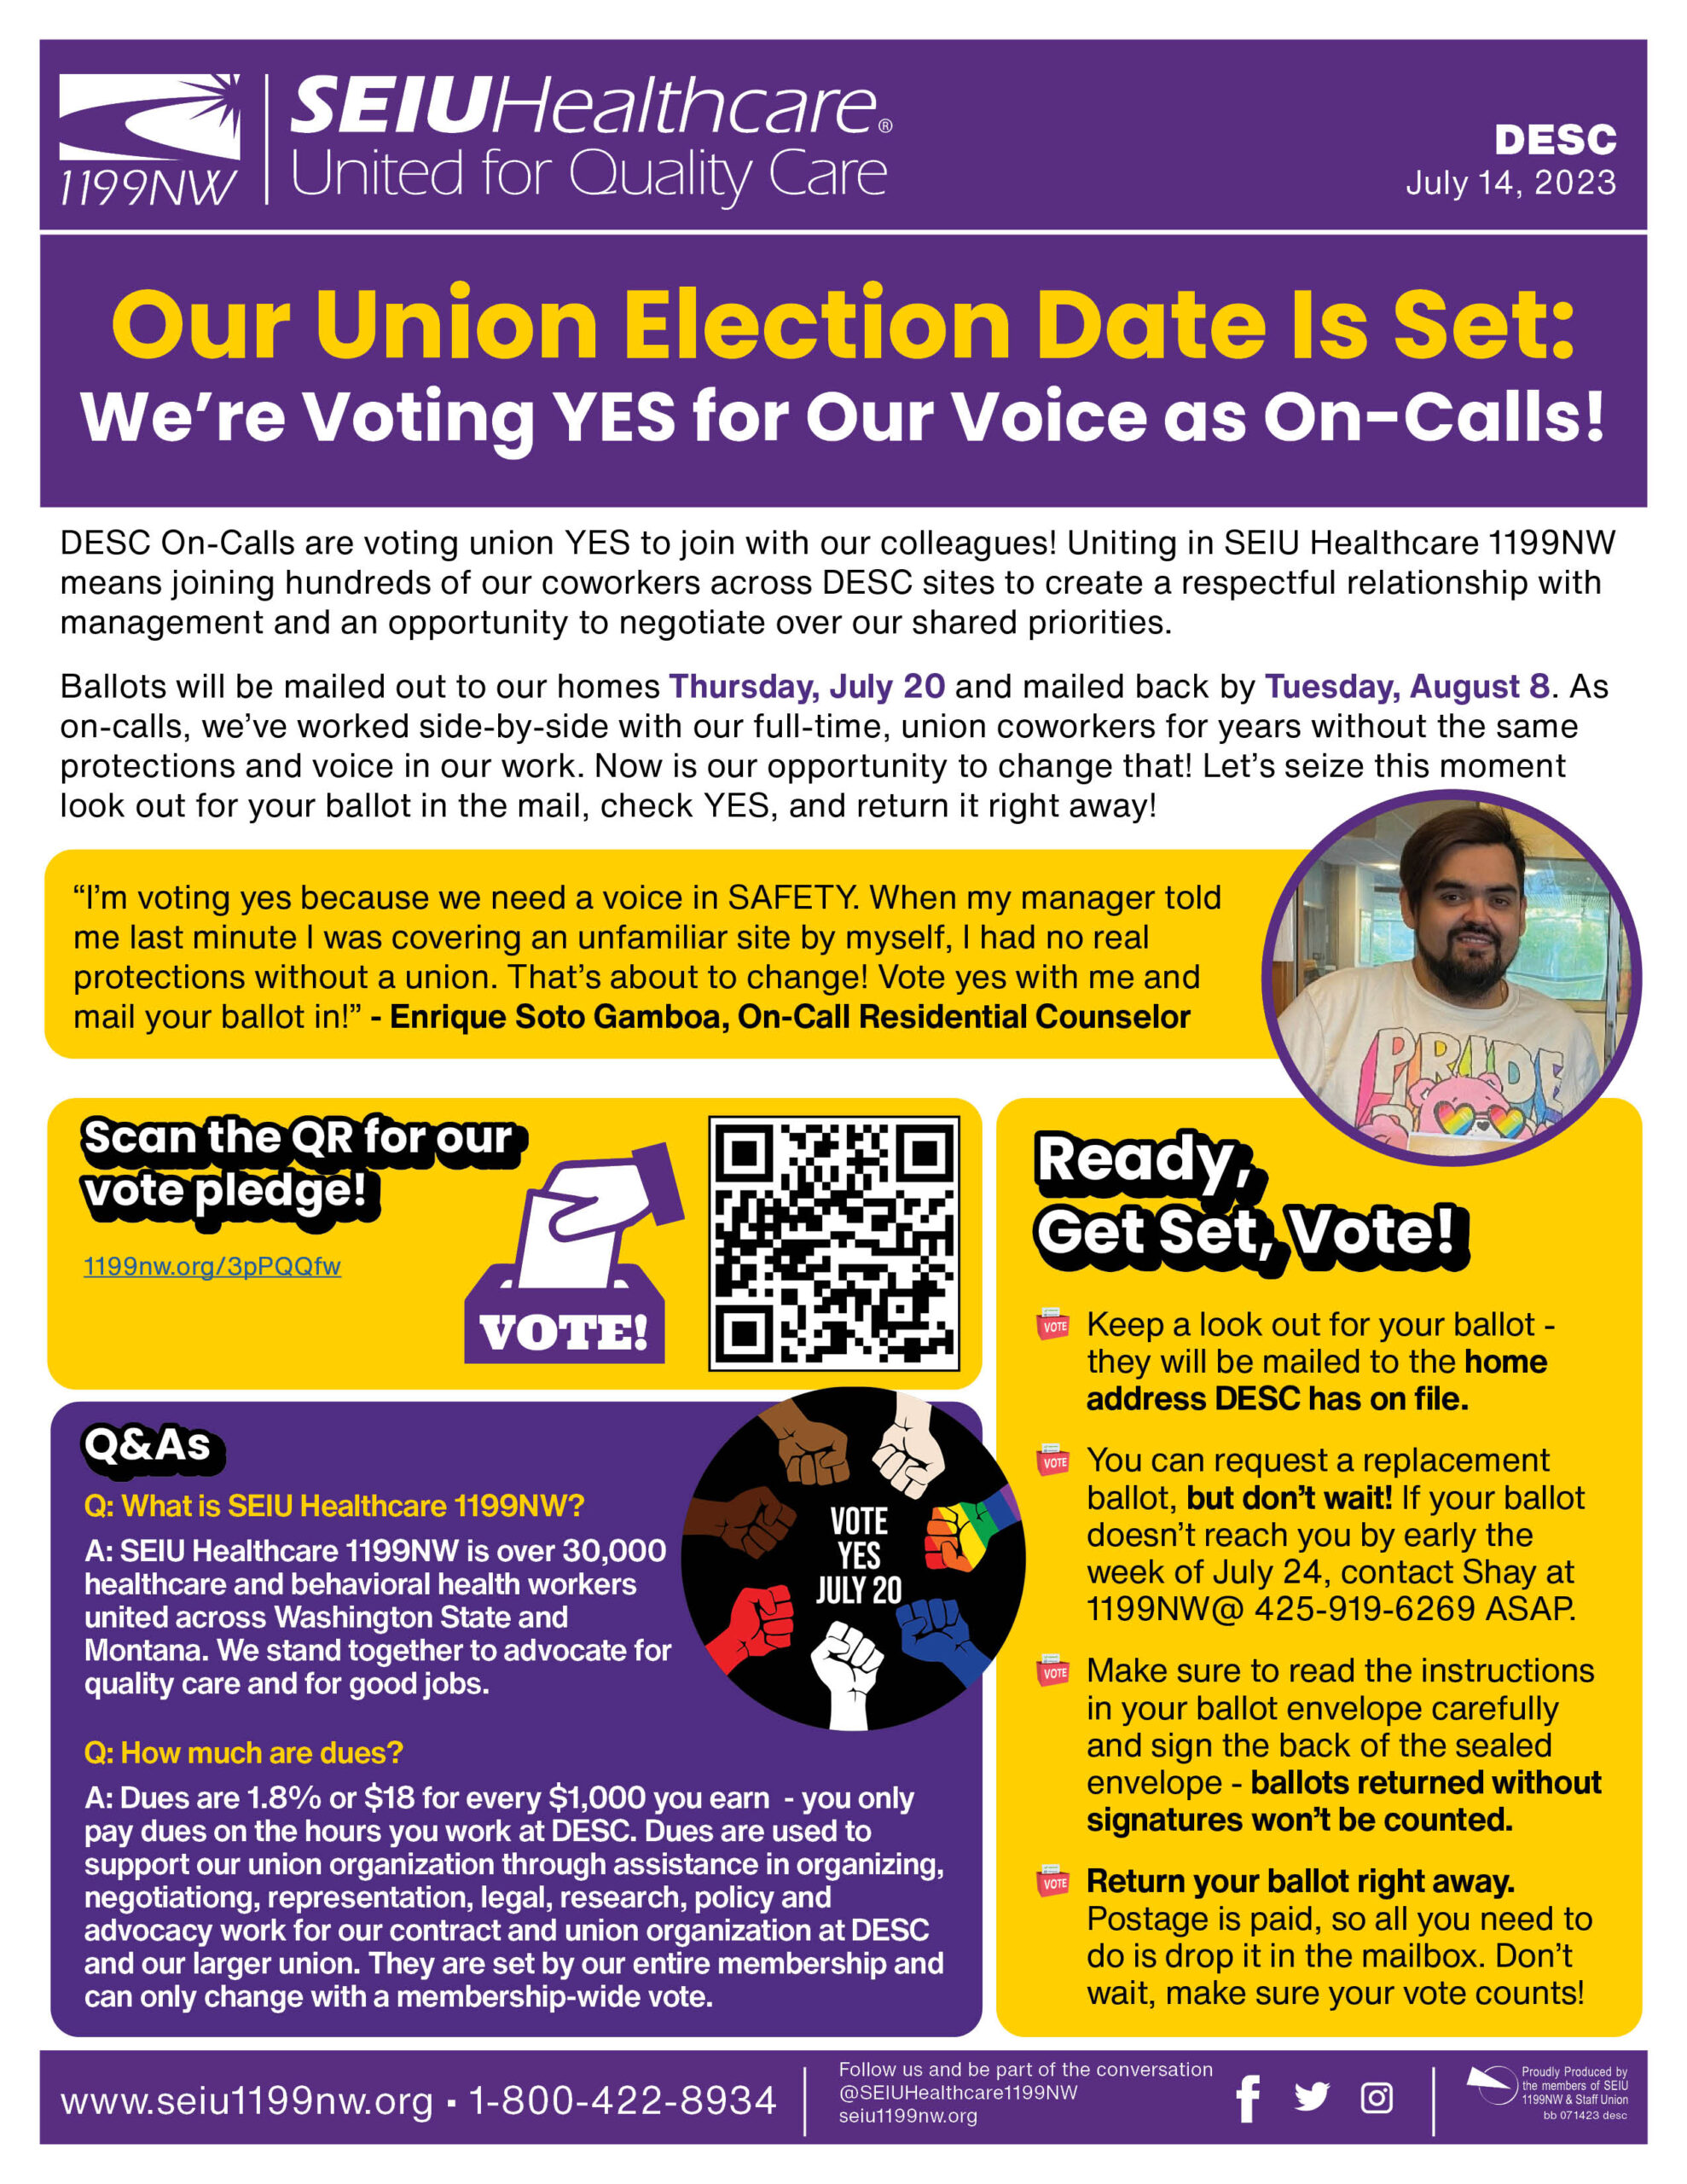 Our Union Election Date Is Set: We’re Voting YES for Our Voice as On-Calls!